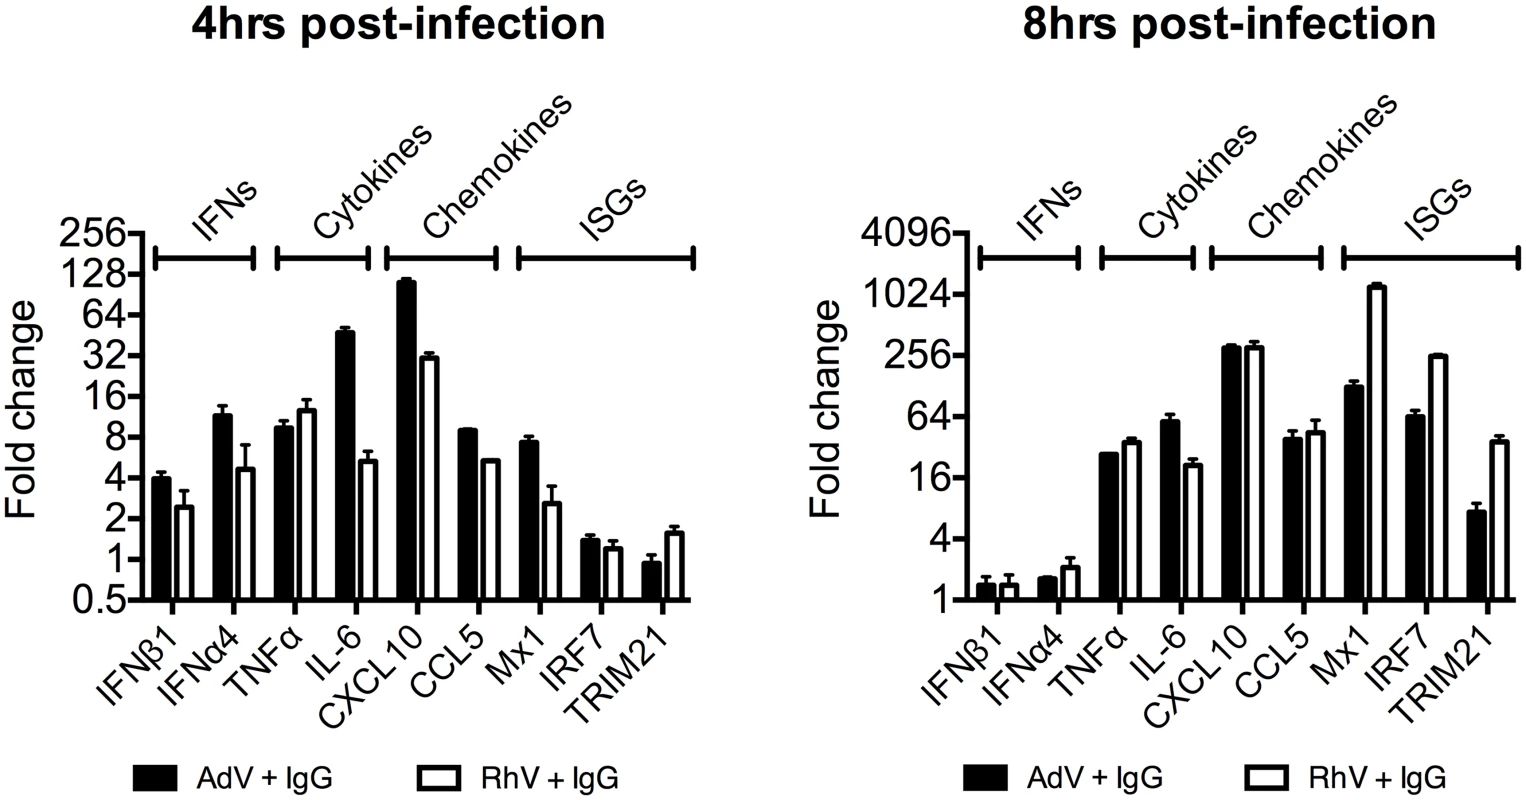 Transcriptional profiles induced by different antibody-opsonized viruses are differentially modulated during infection.